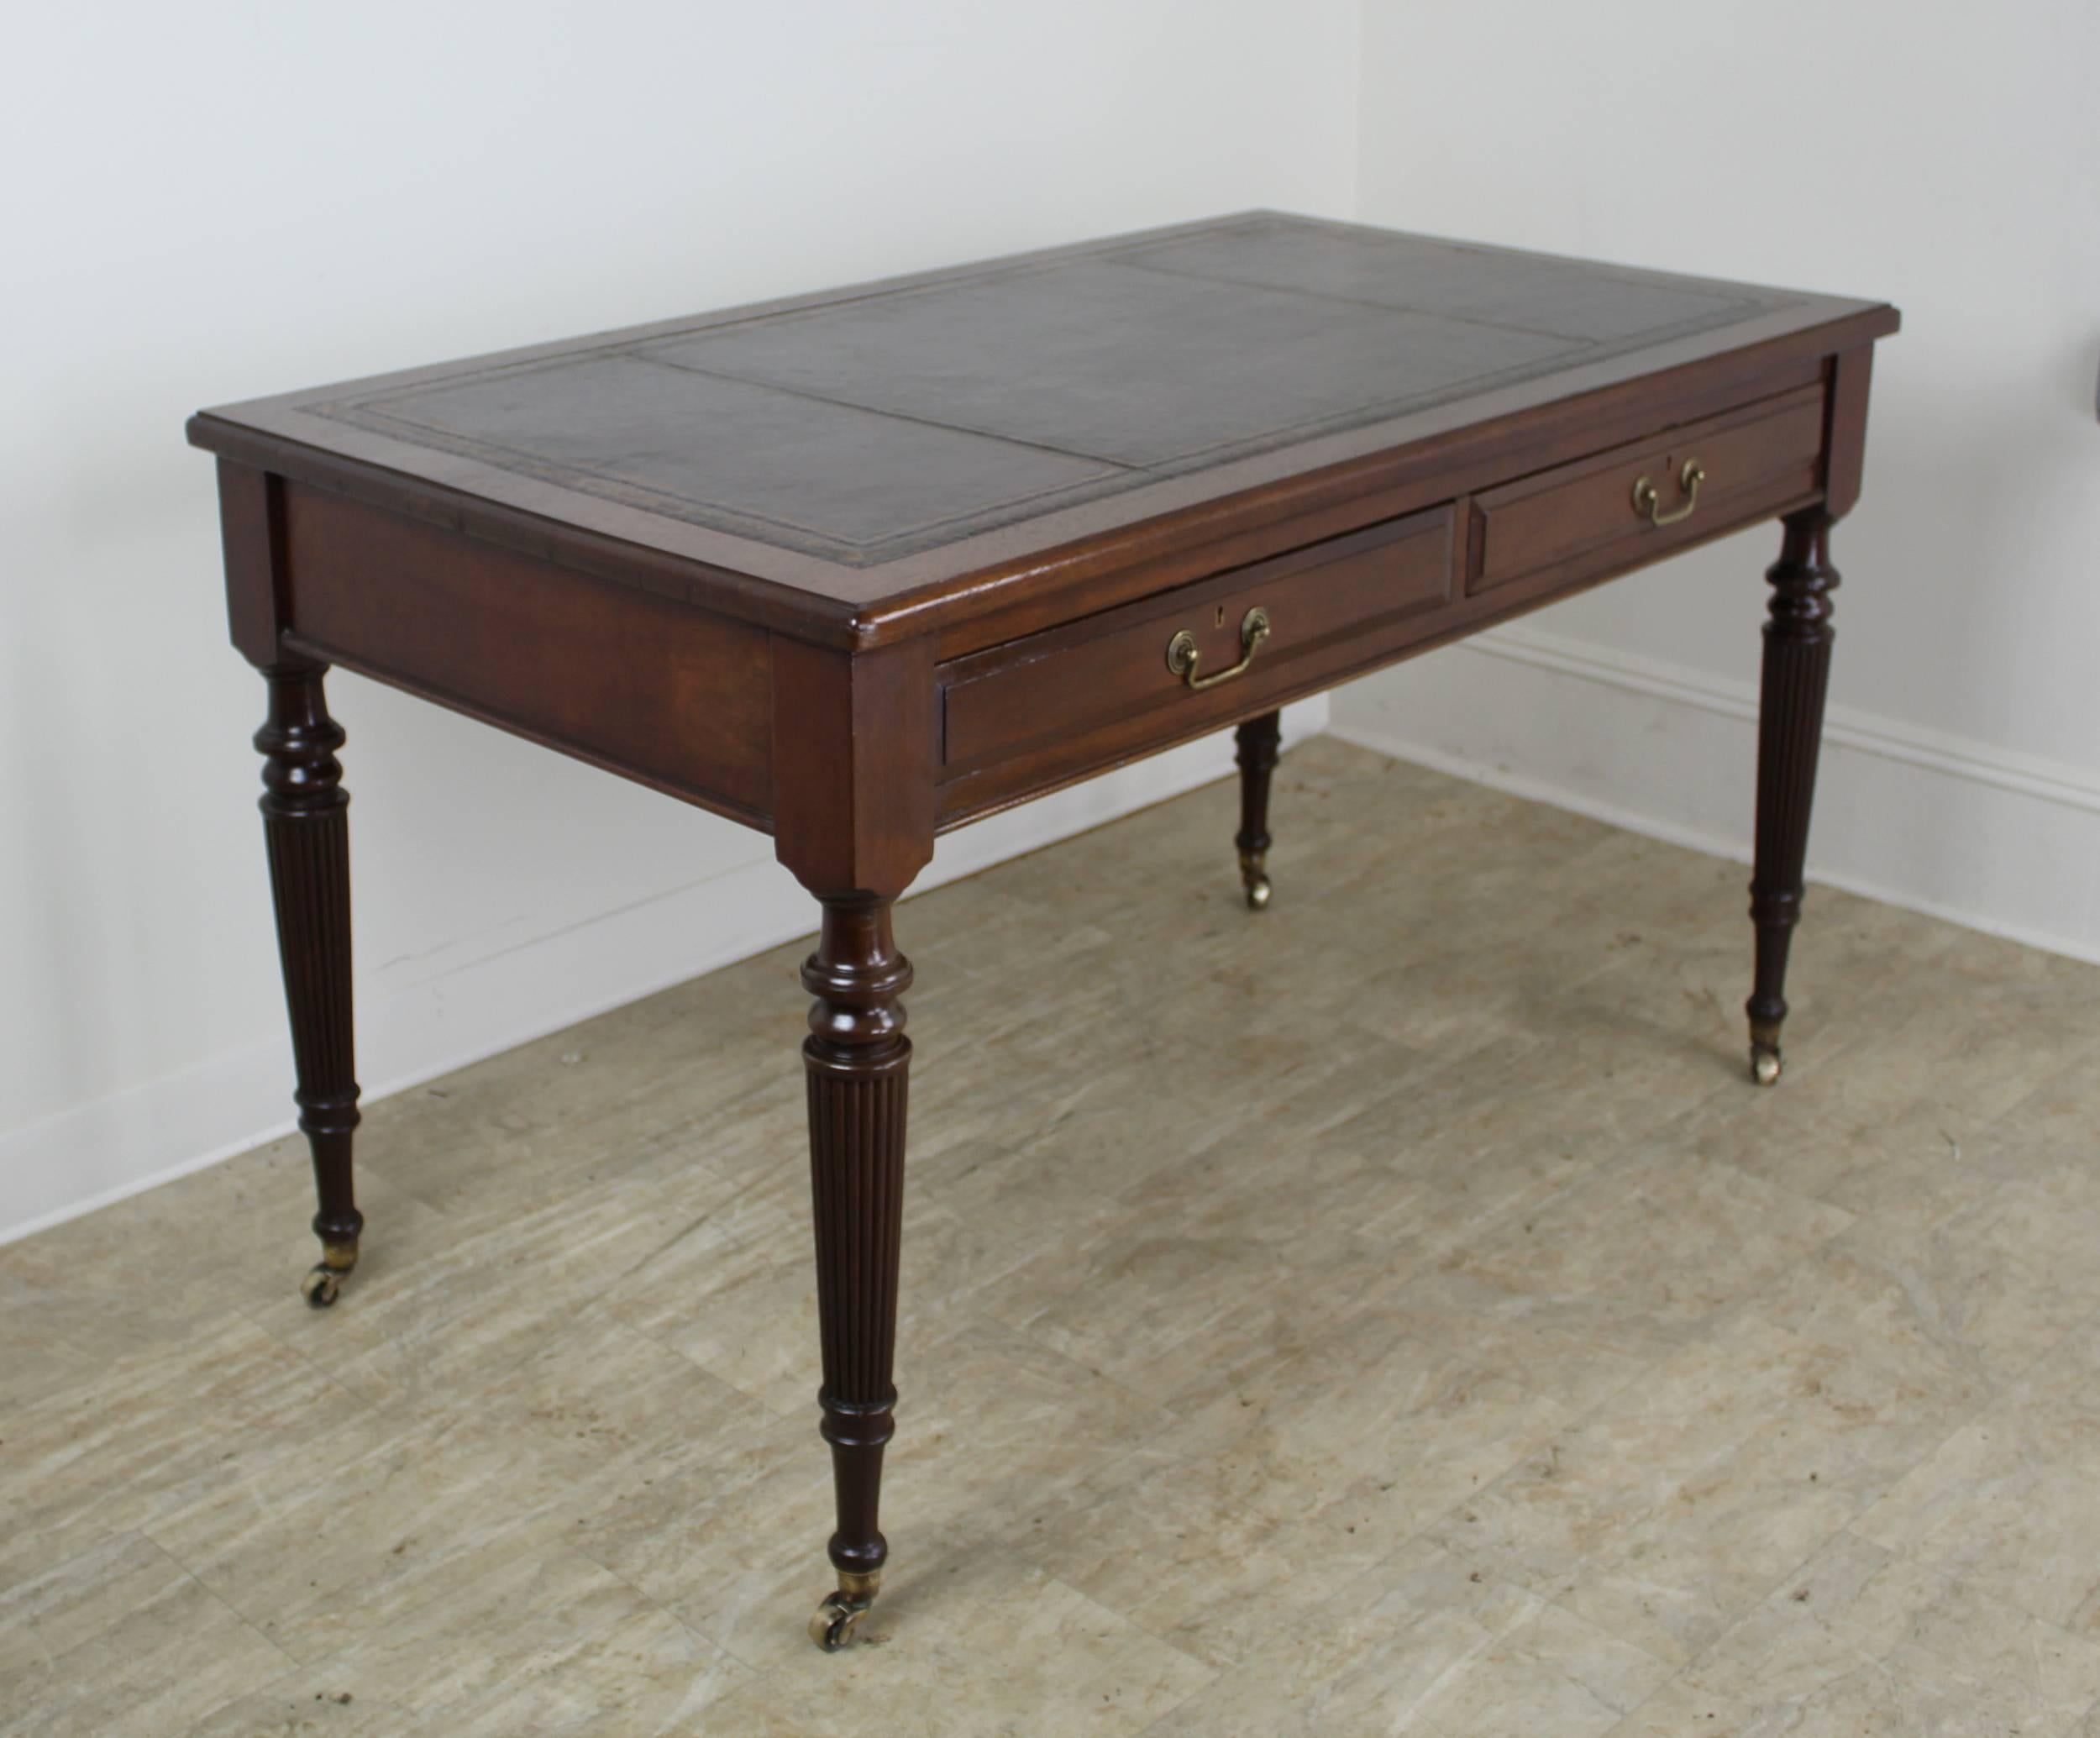 An elegant walnut desk in the Georgian style with eye-catching turned legs. Lovely brass castors and drop handles. Rich cordovan leather with gold embossed edges. Knee room a comfortable 24